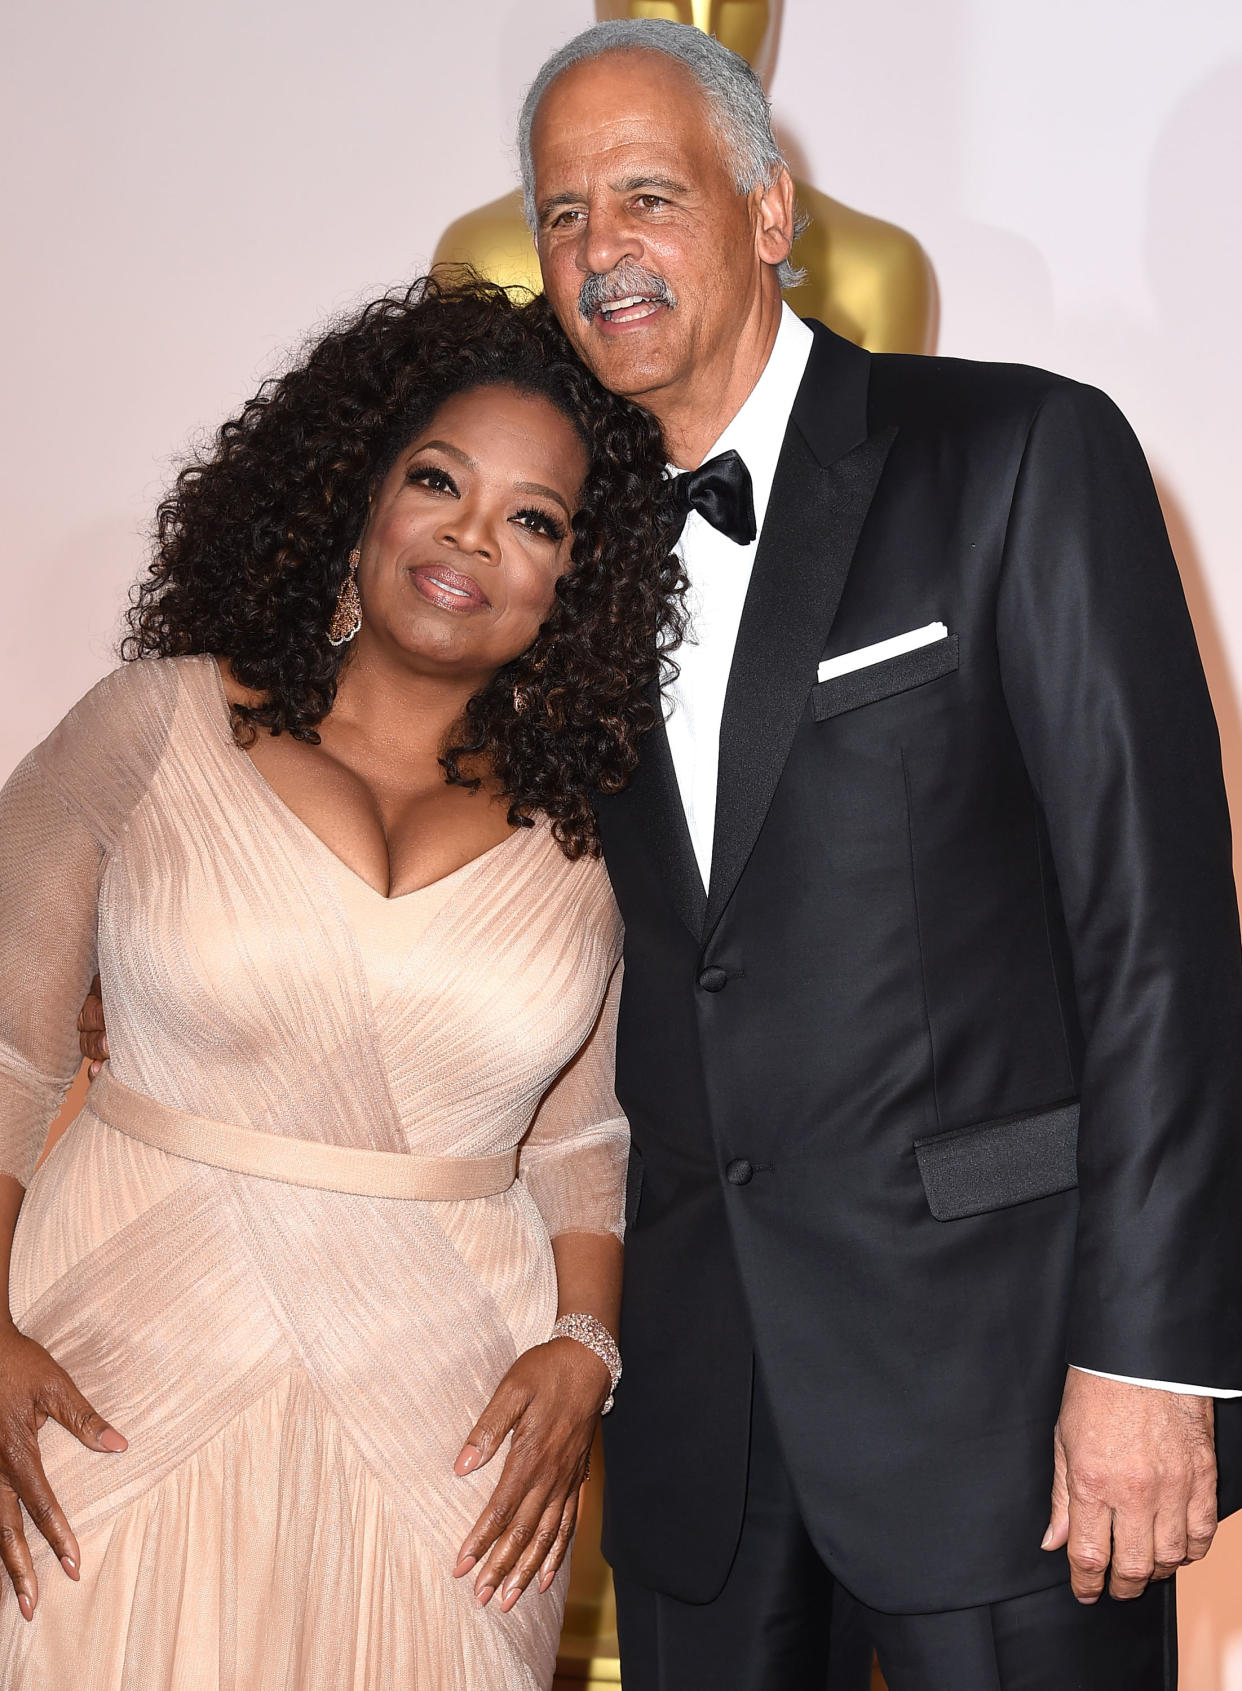 Oprah Winfrey and Stedman Graham smile as they arrive at the Vanity Fair Oscar party in 2015, but that isn’t good tabloid material. They look too happy! (Photo: Steve Granitz/WireImage)